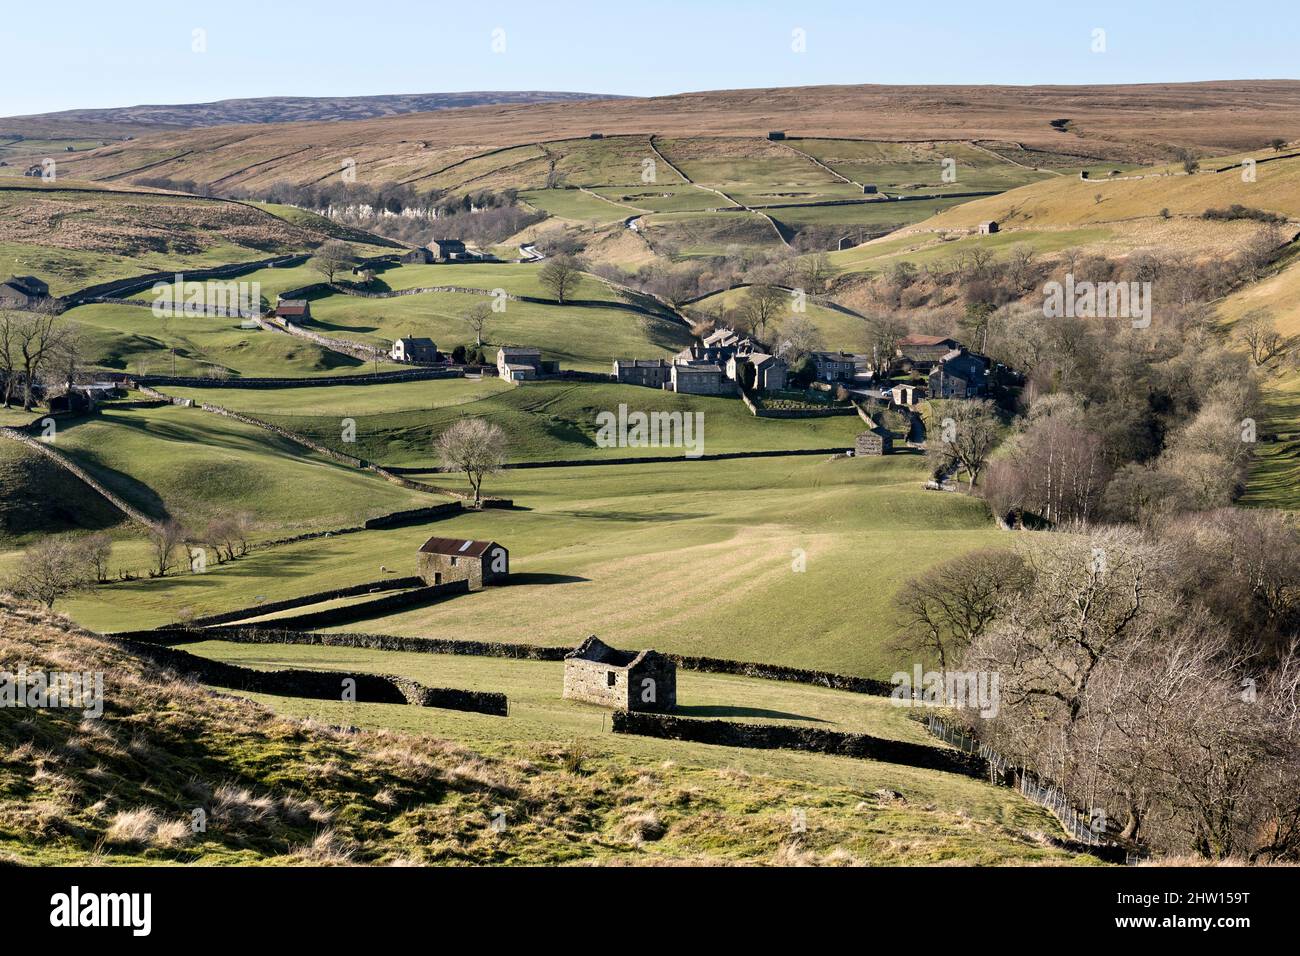 The village of Keld in upper Swaledale, Yorkshire Dales National Park, UK. The village is surrounded by many traditional field barns Stock Photo